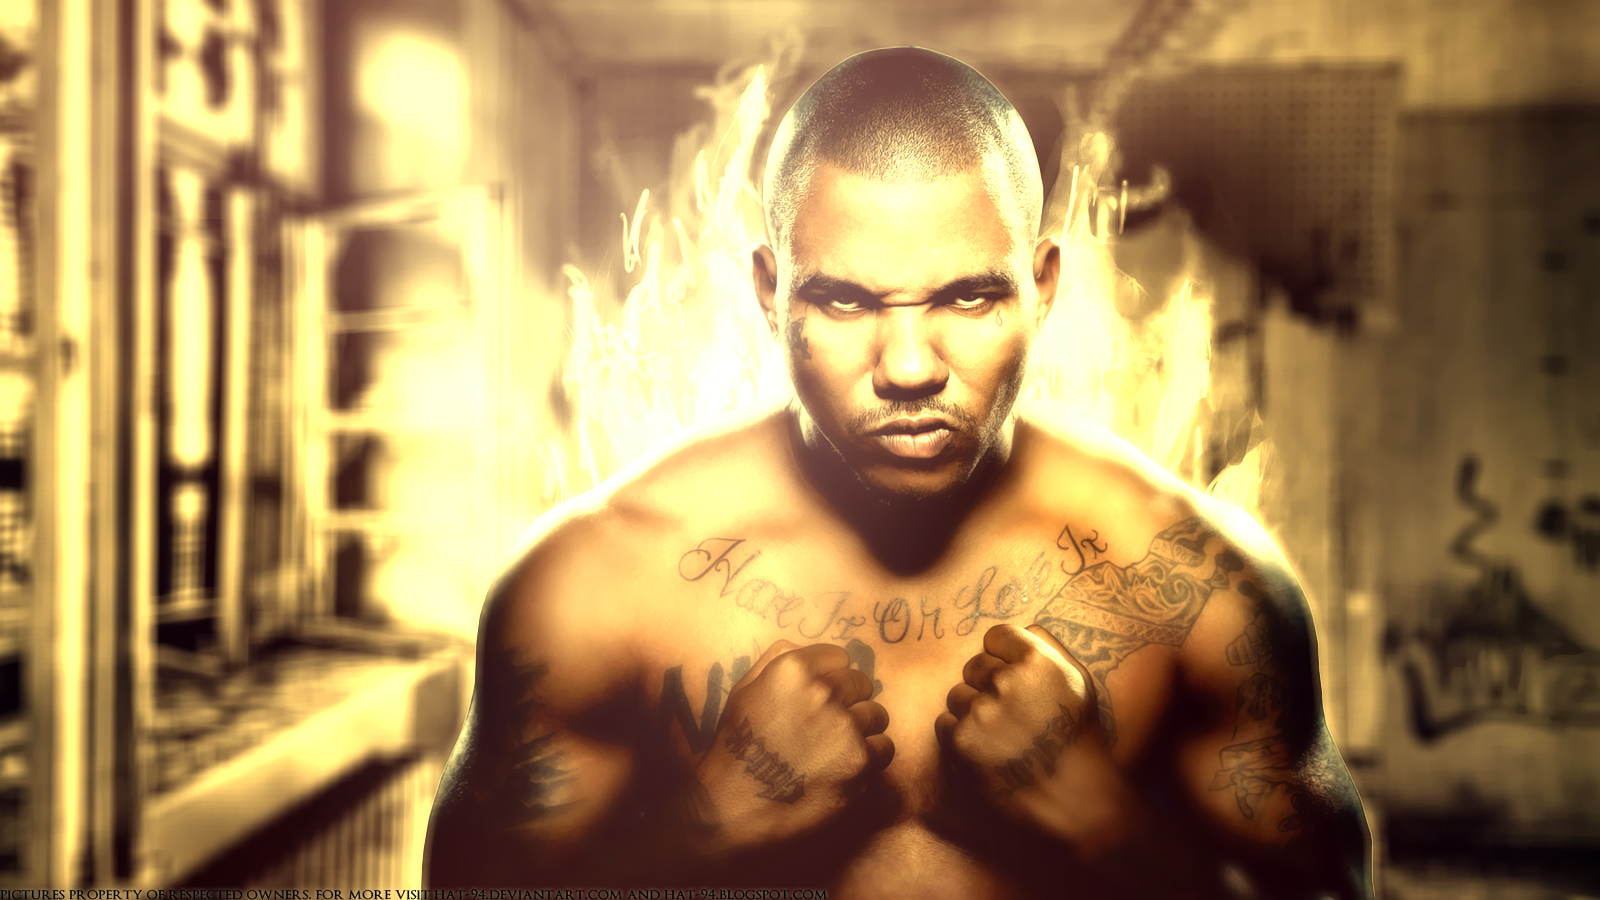 The Game Wallpaper Rapper 66 images